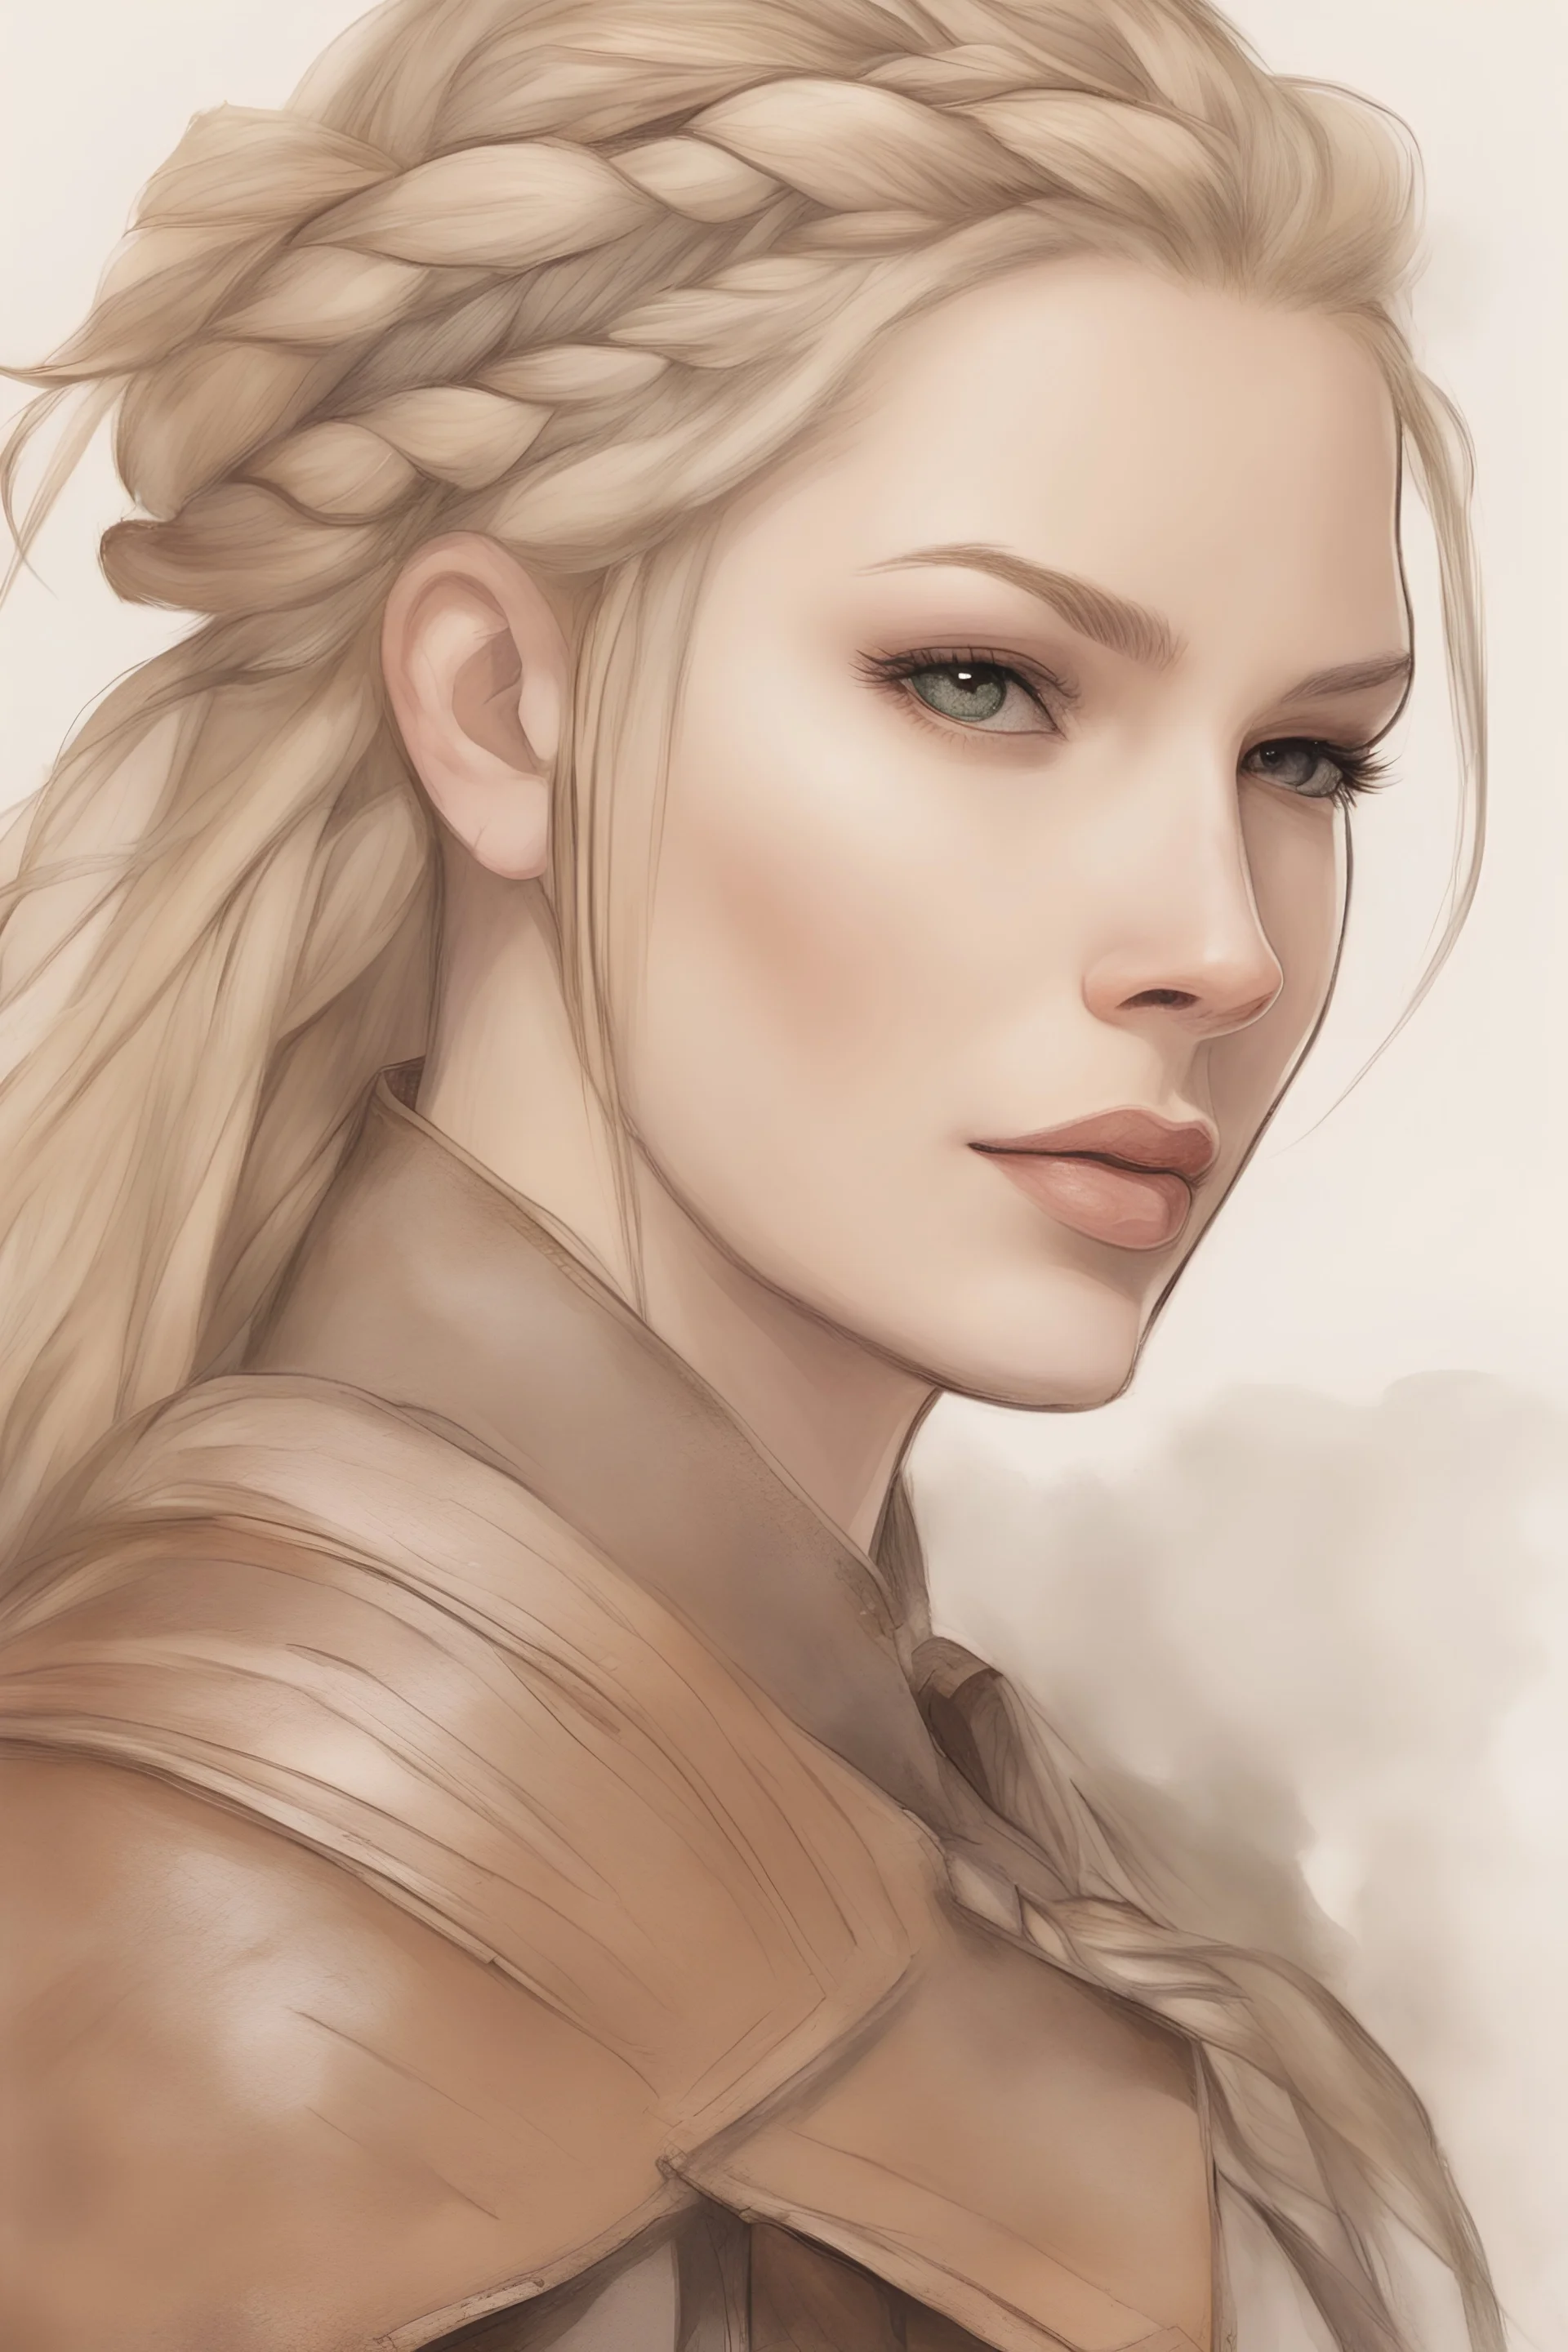 A drawing of beautiful woman with blond hair, viking braids, undercut. Brown leather armor.